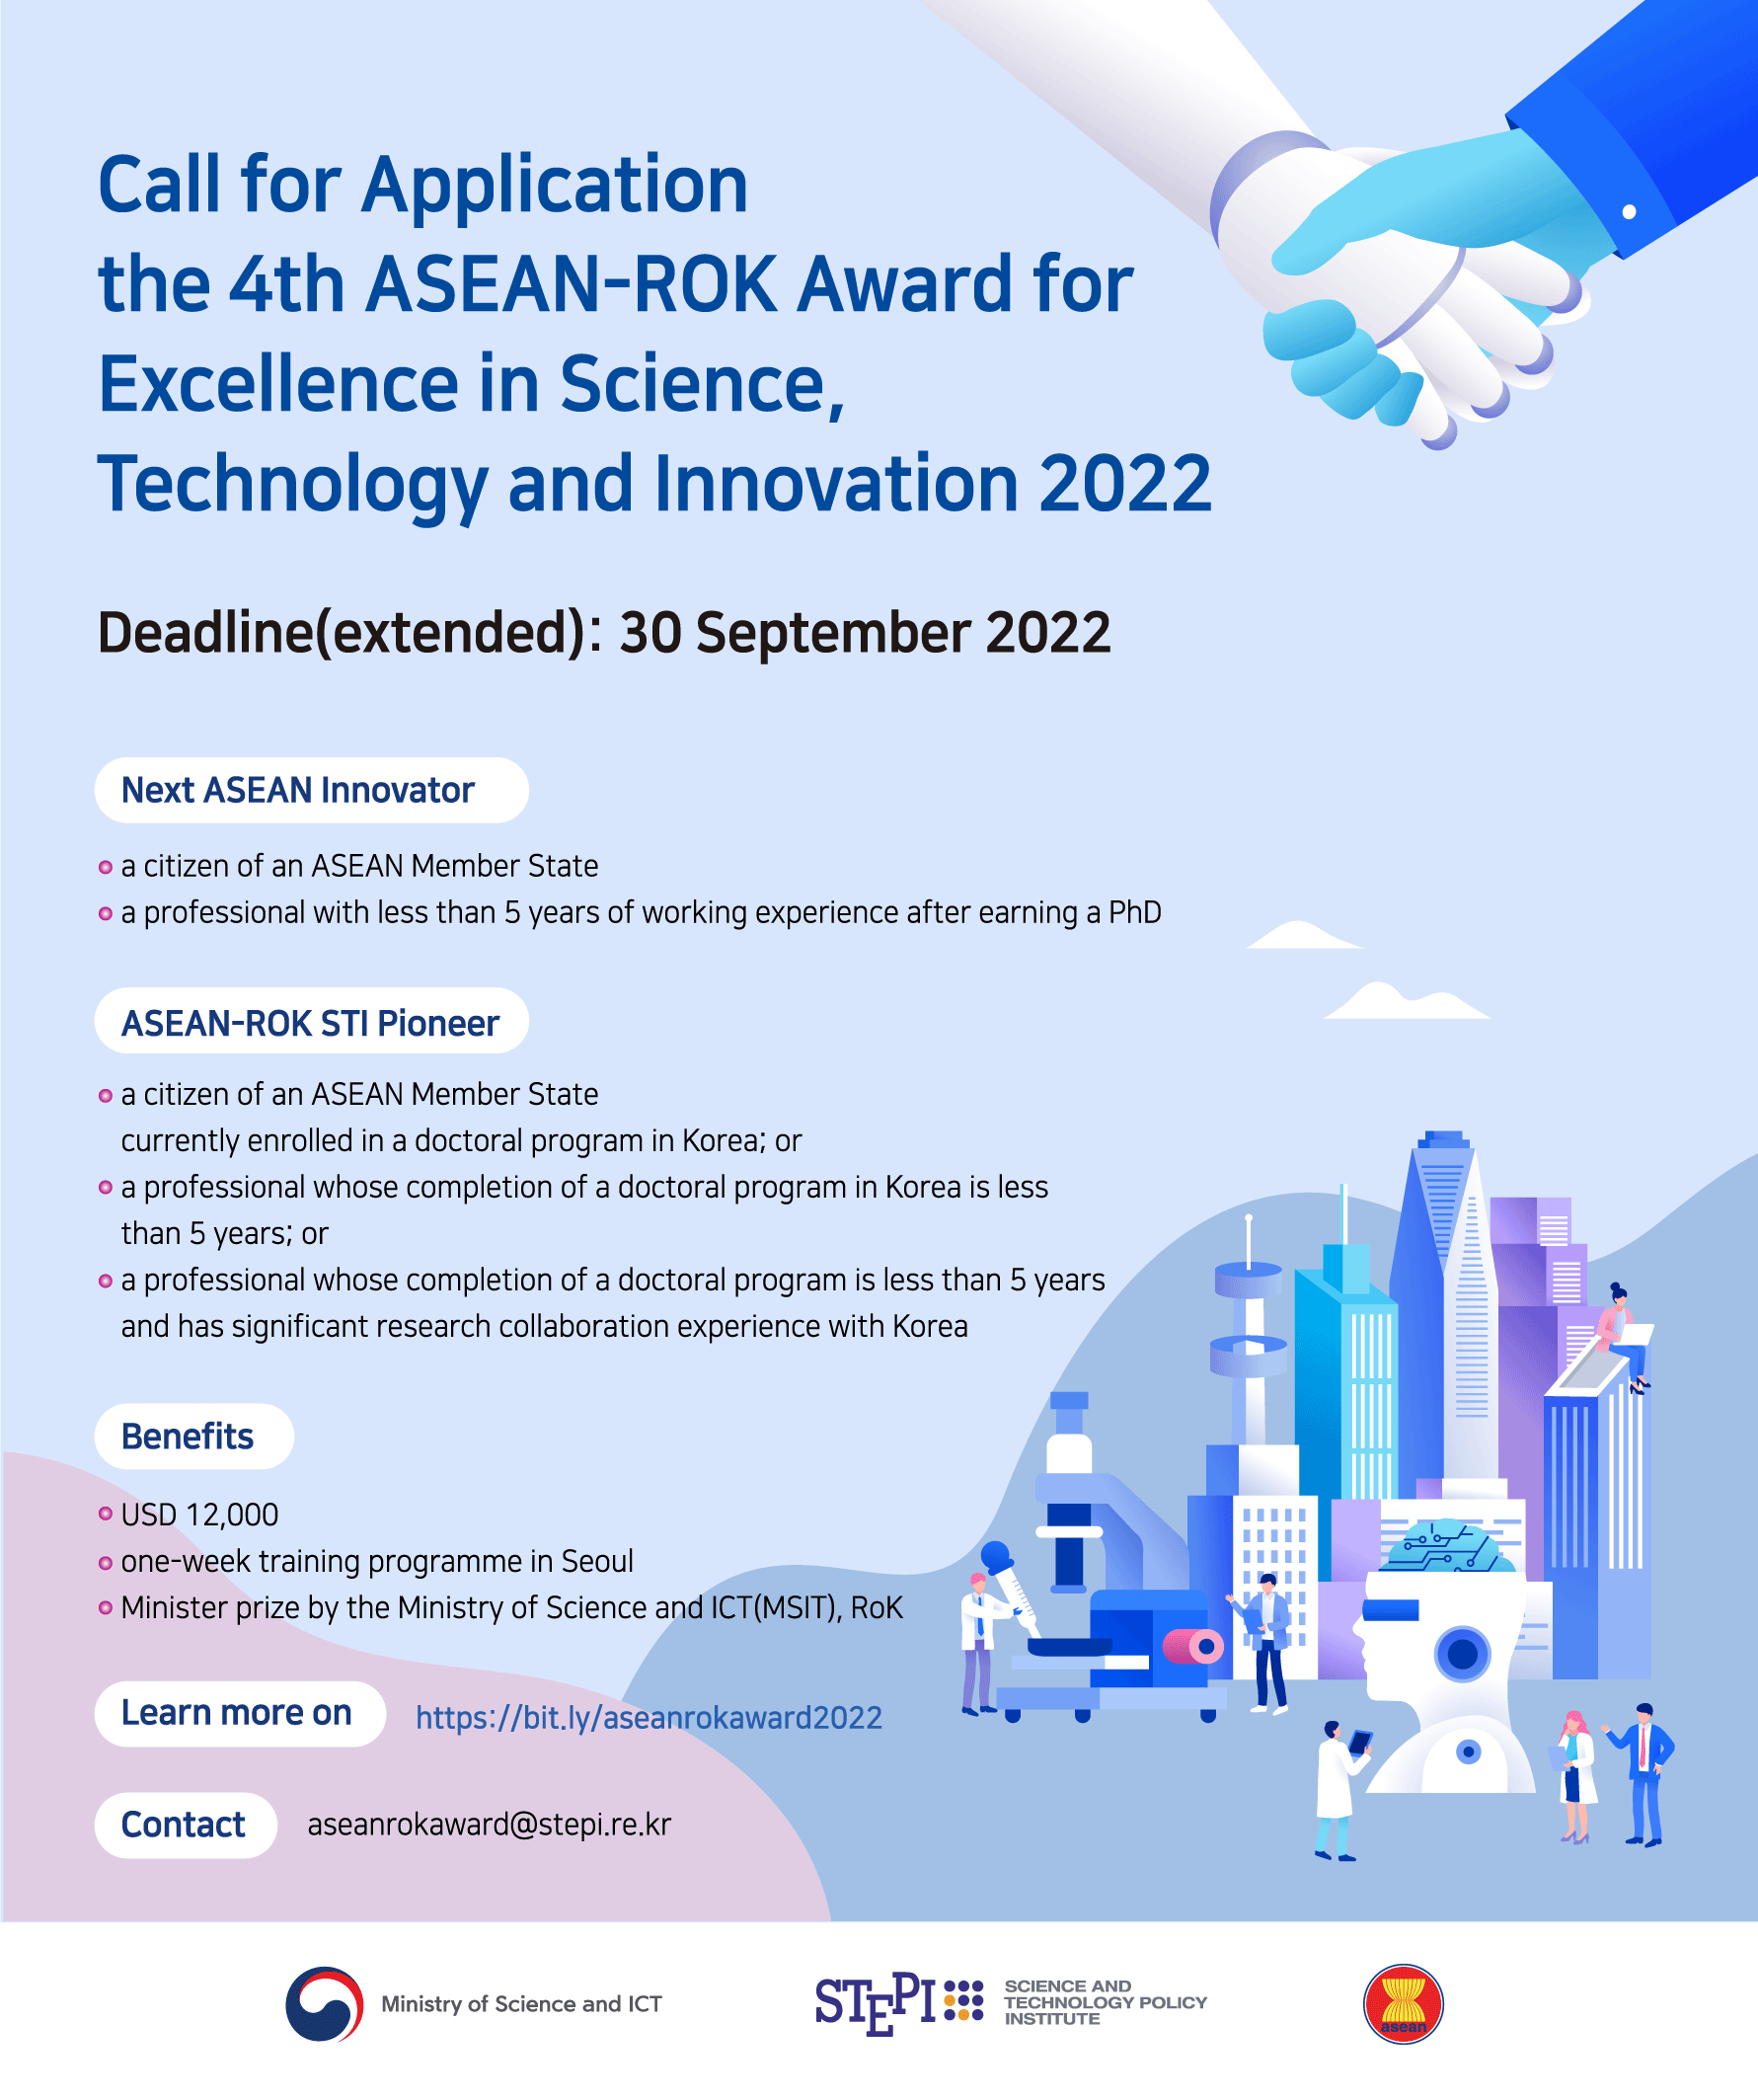 Call for Applications: ASEAN-ROK Award for Excellence in Science, Technology and Innovation 2022